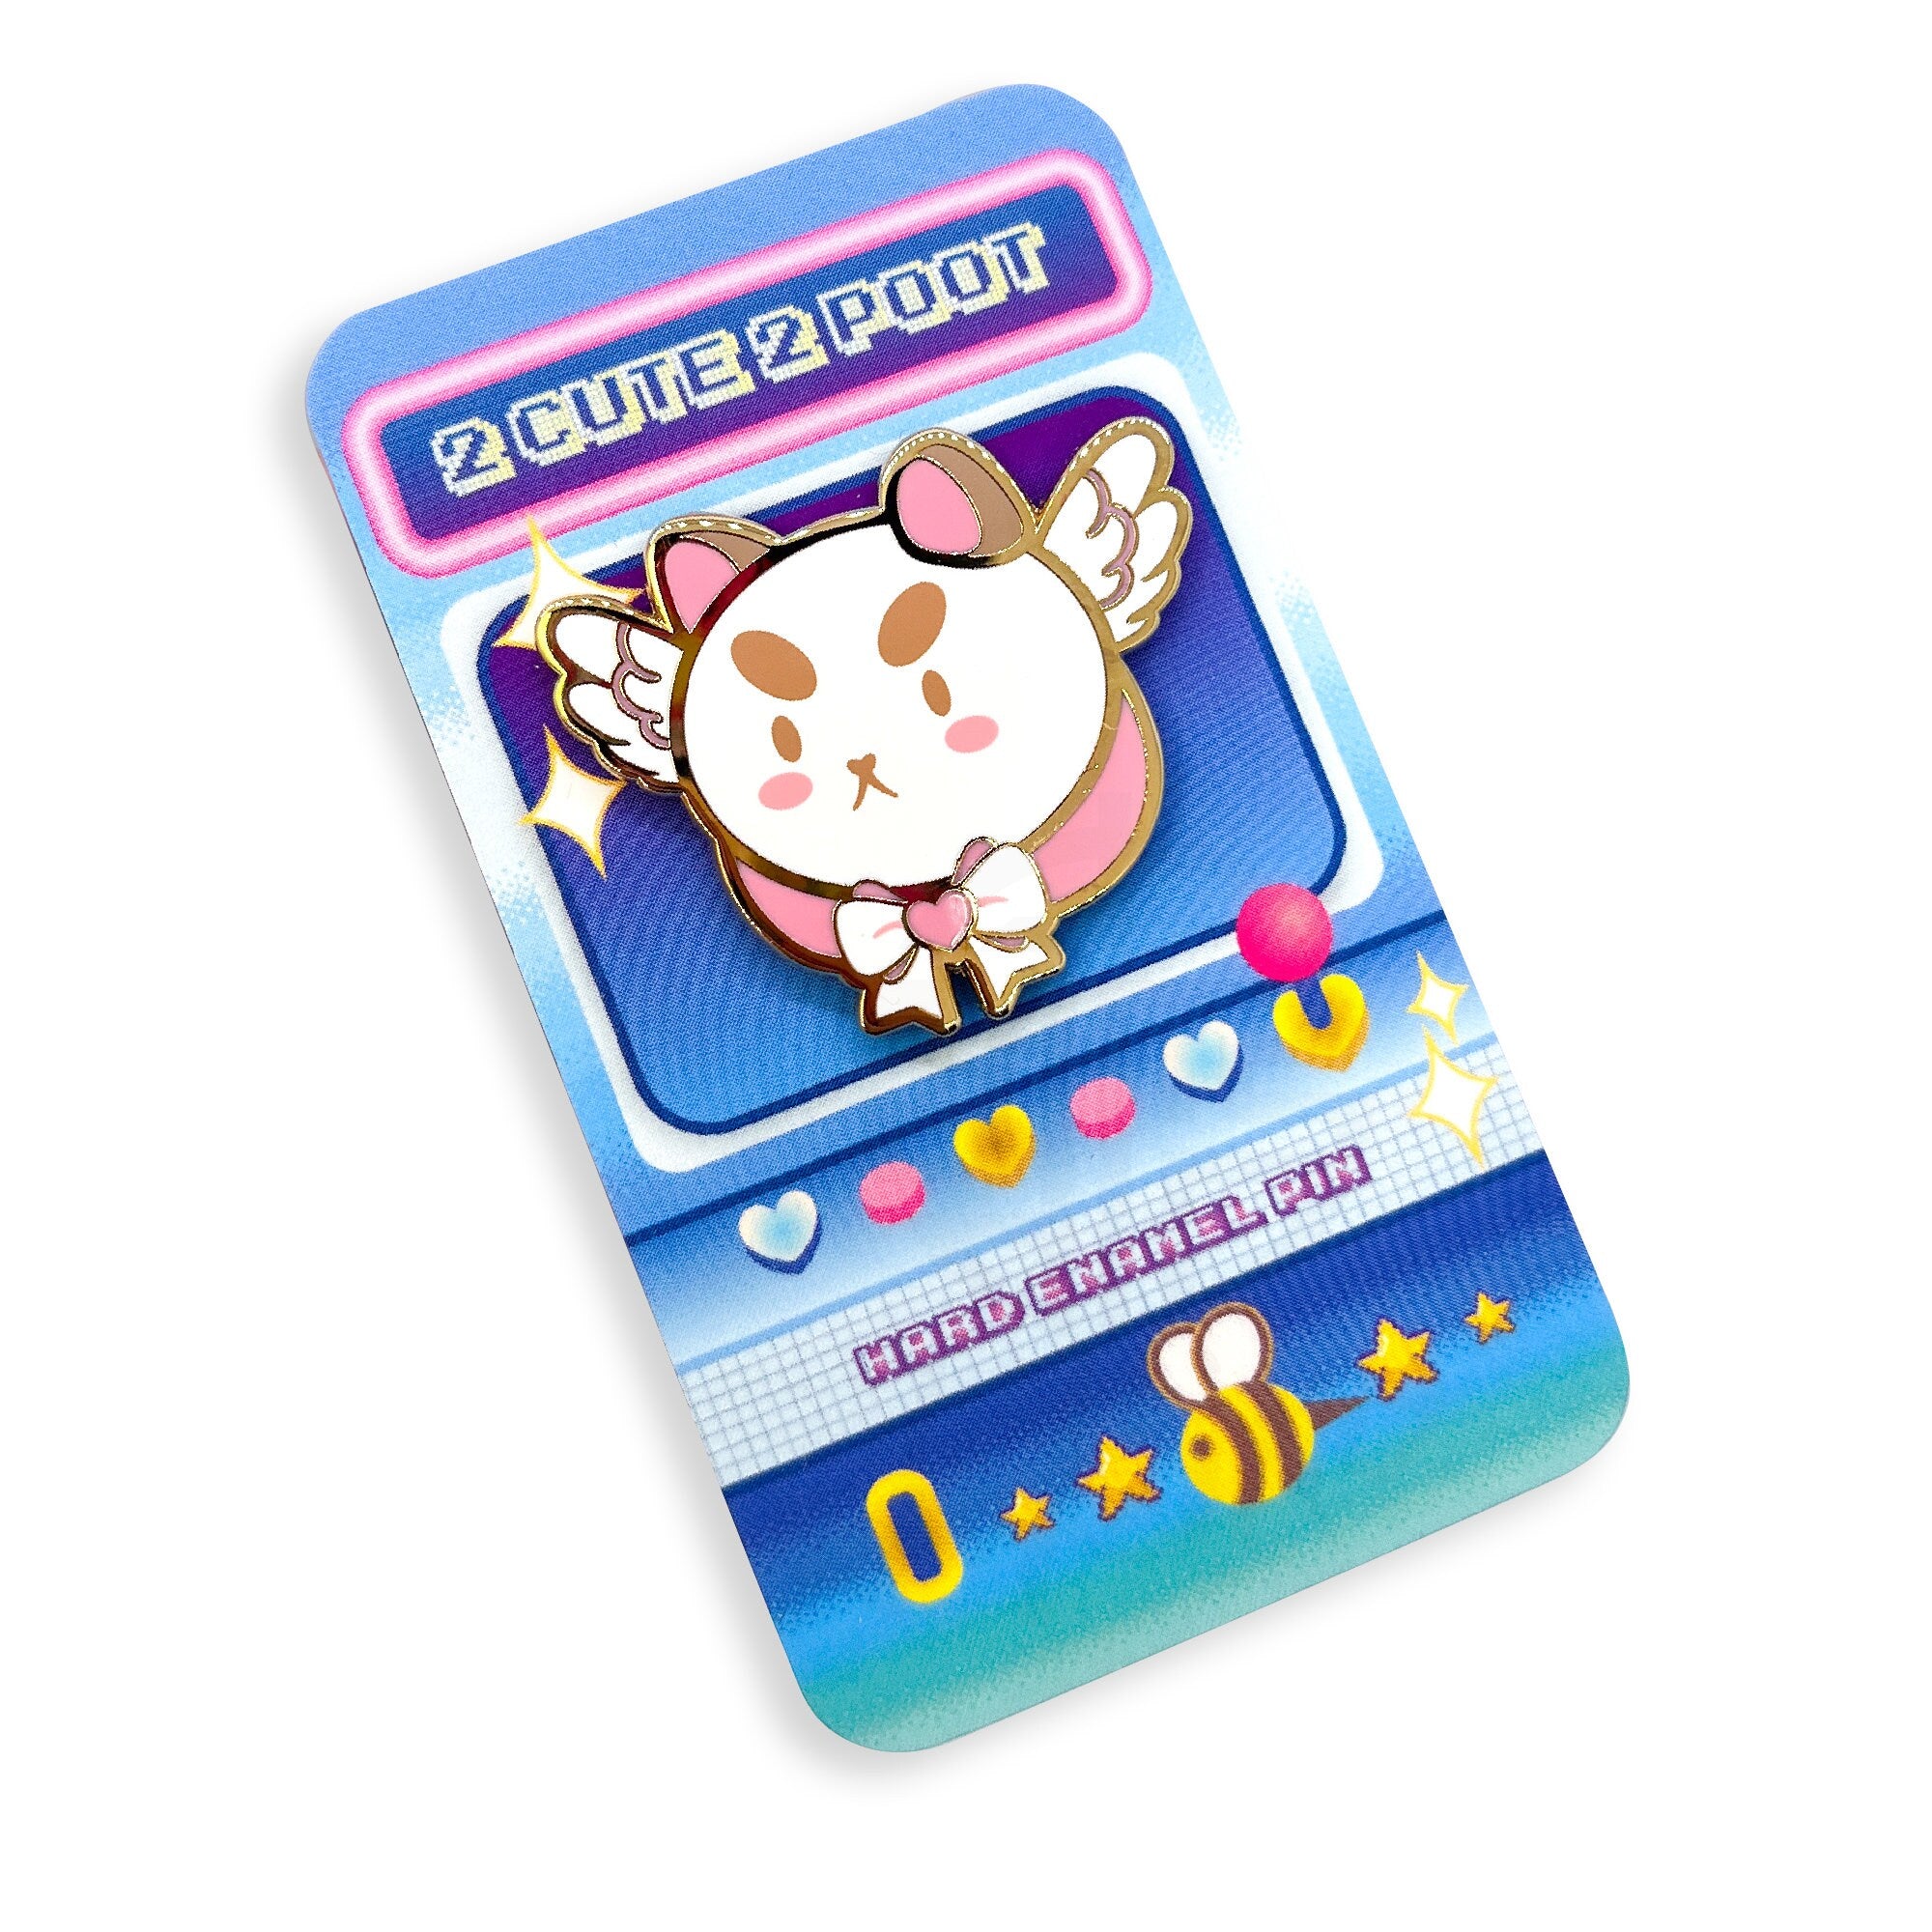 3 PIN BUNDLE - Cute Bee and Puppycat and Tempbot  Hard Enamel Gold Lapel Locking Clutches with FREE STICKERs Kawaii Cartoon Fanart by Dokino